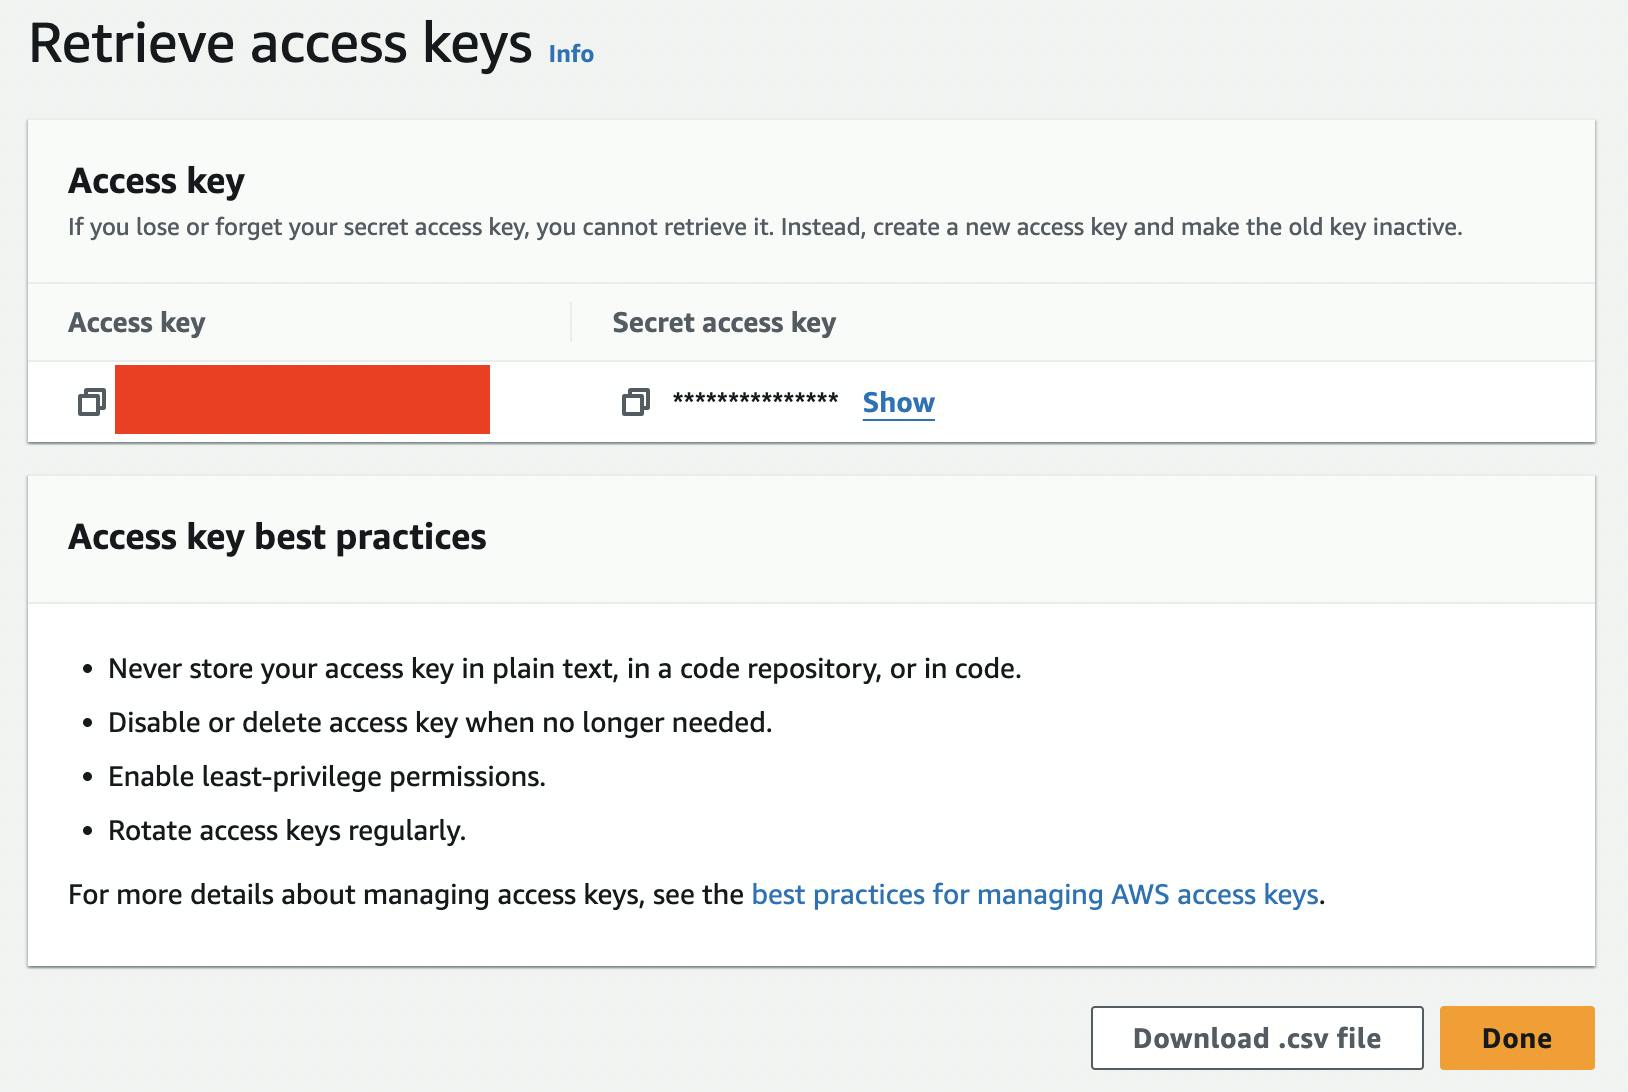 Show the result page after the access key and its secret access key are created.